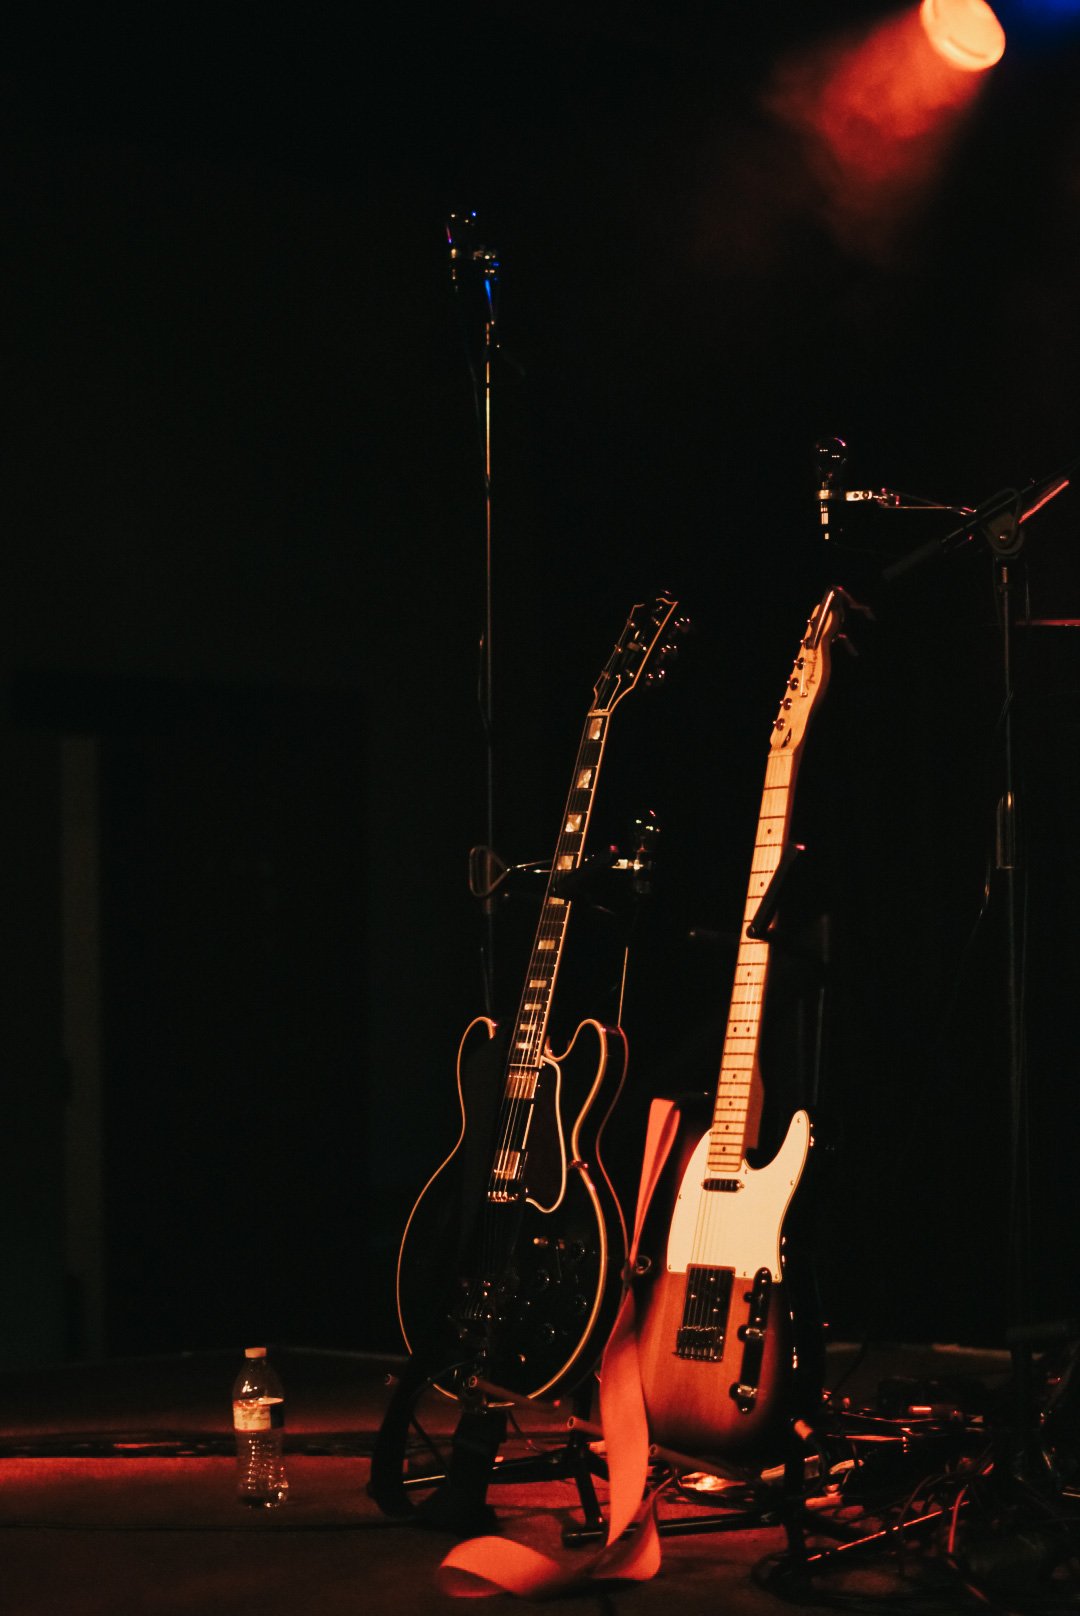  On-stage guitars prepared for the upcoming performance. 